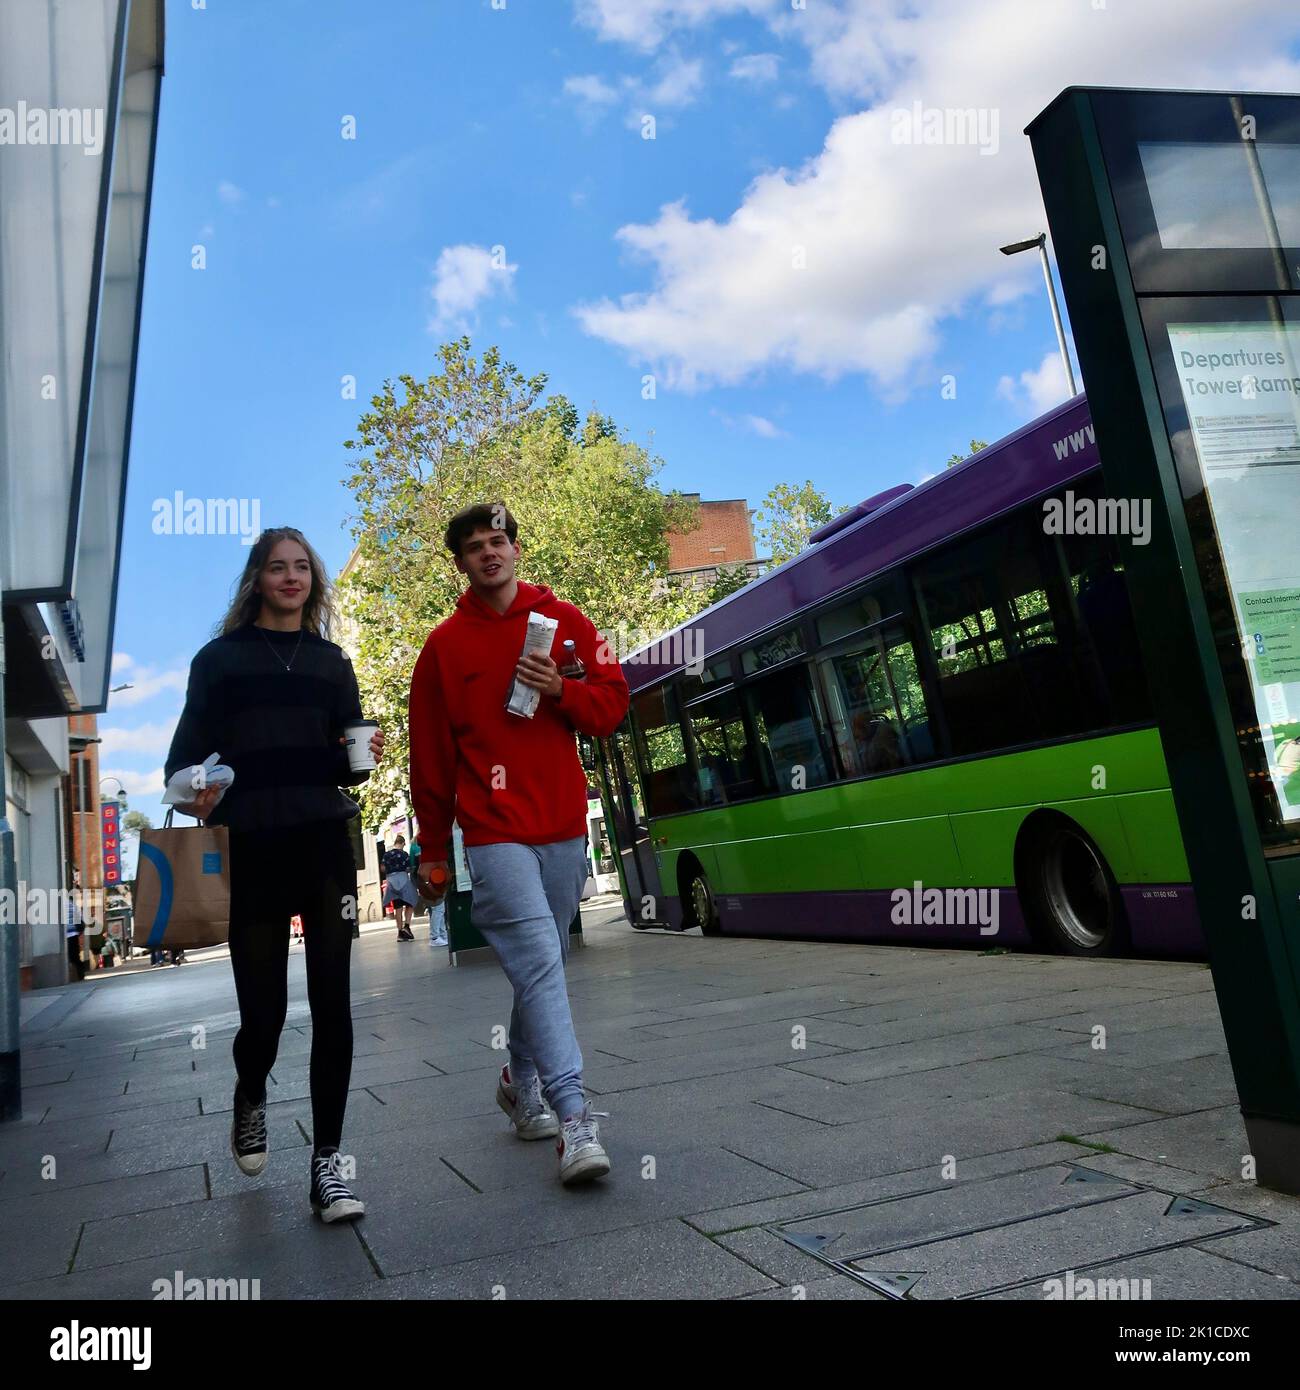 Ipswich, Suffolk, UK - 17 September 2022 : A young man and woman with food and drink walking through Tower Ramparts bus station. Stock Photo